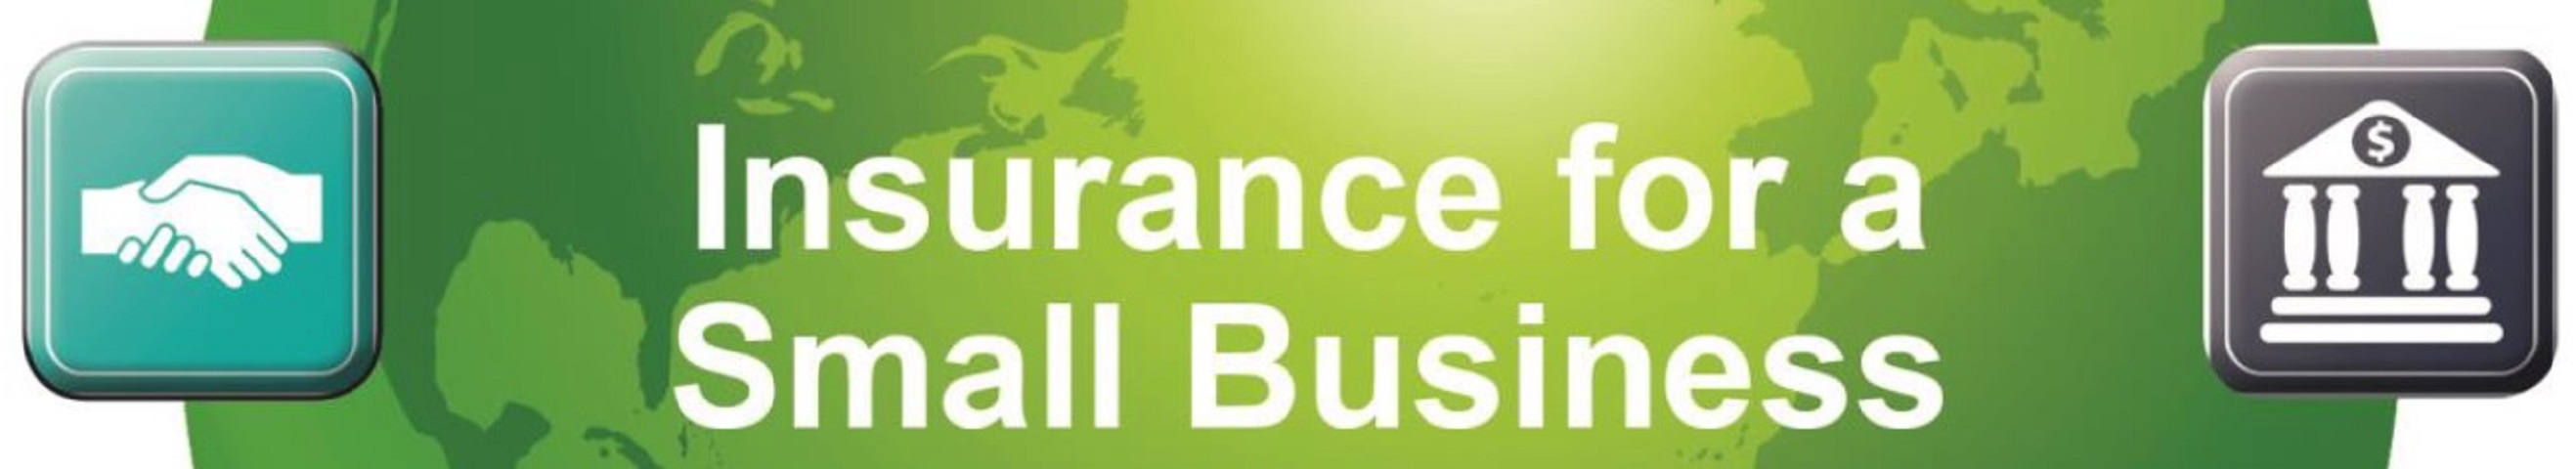 Insurance for a Small Business